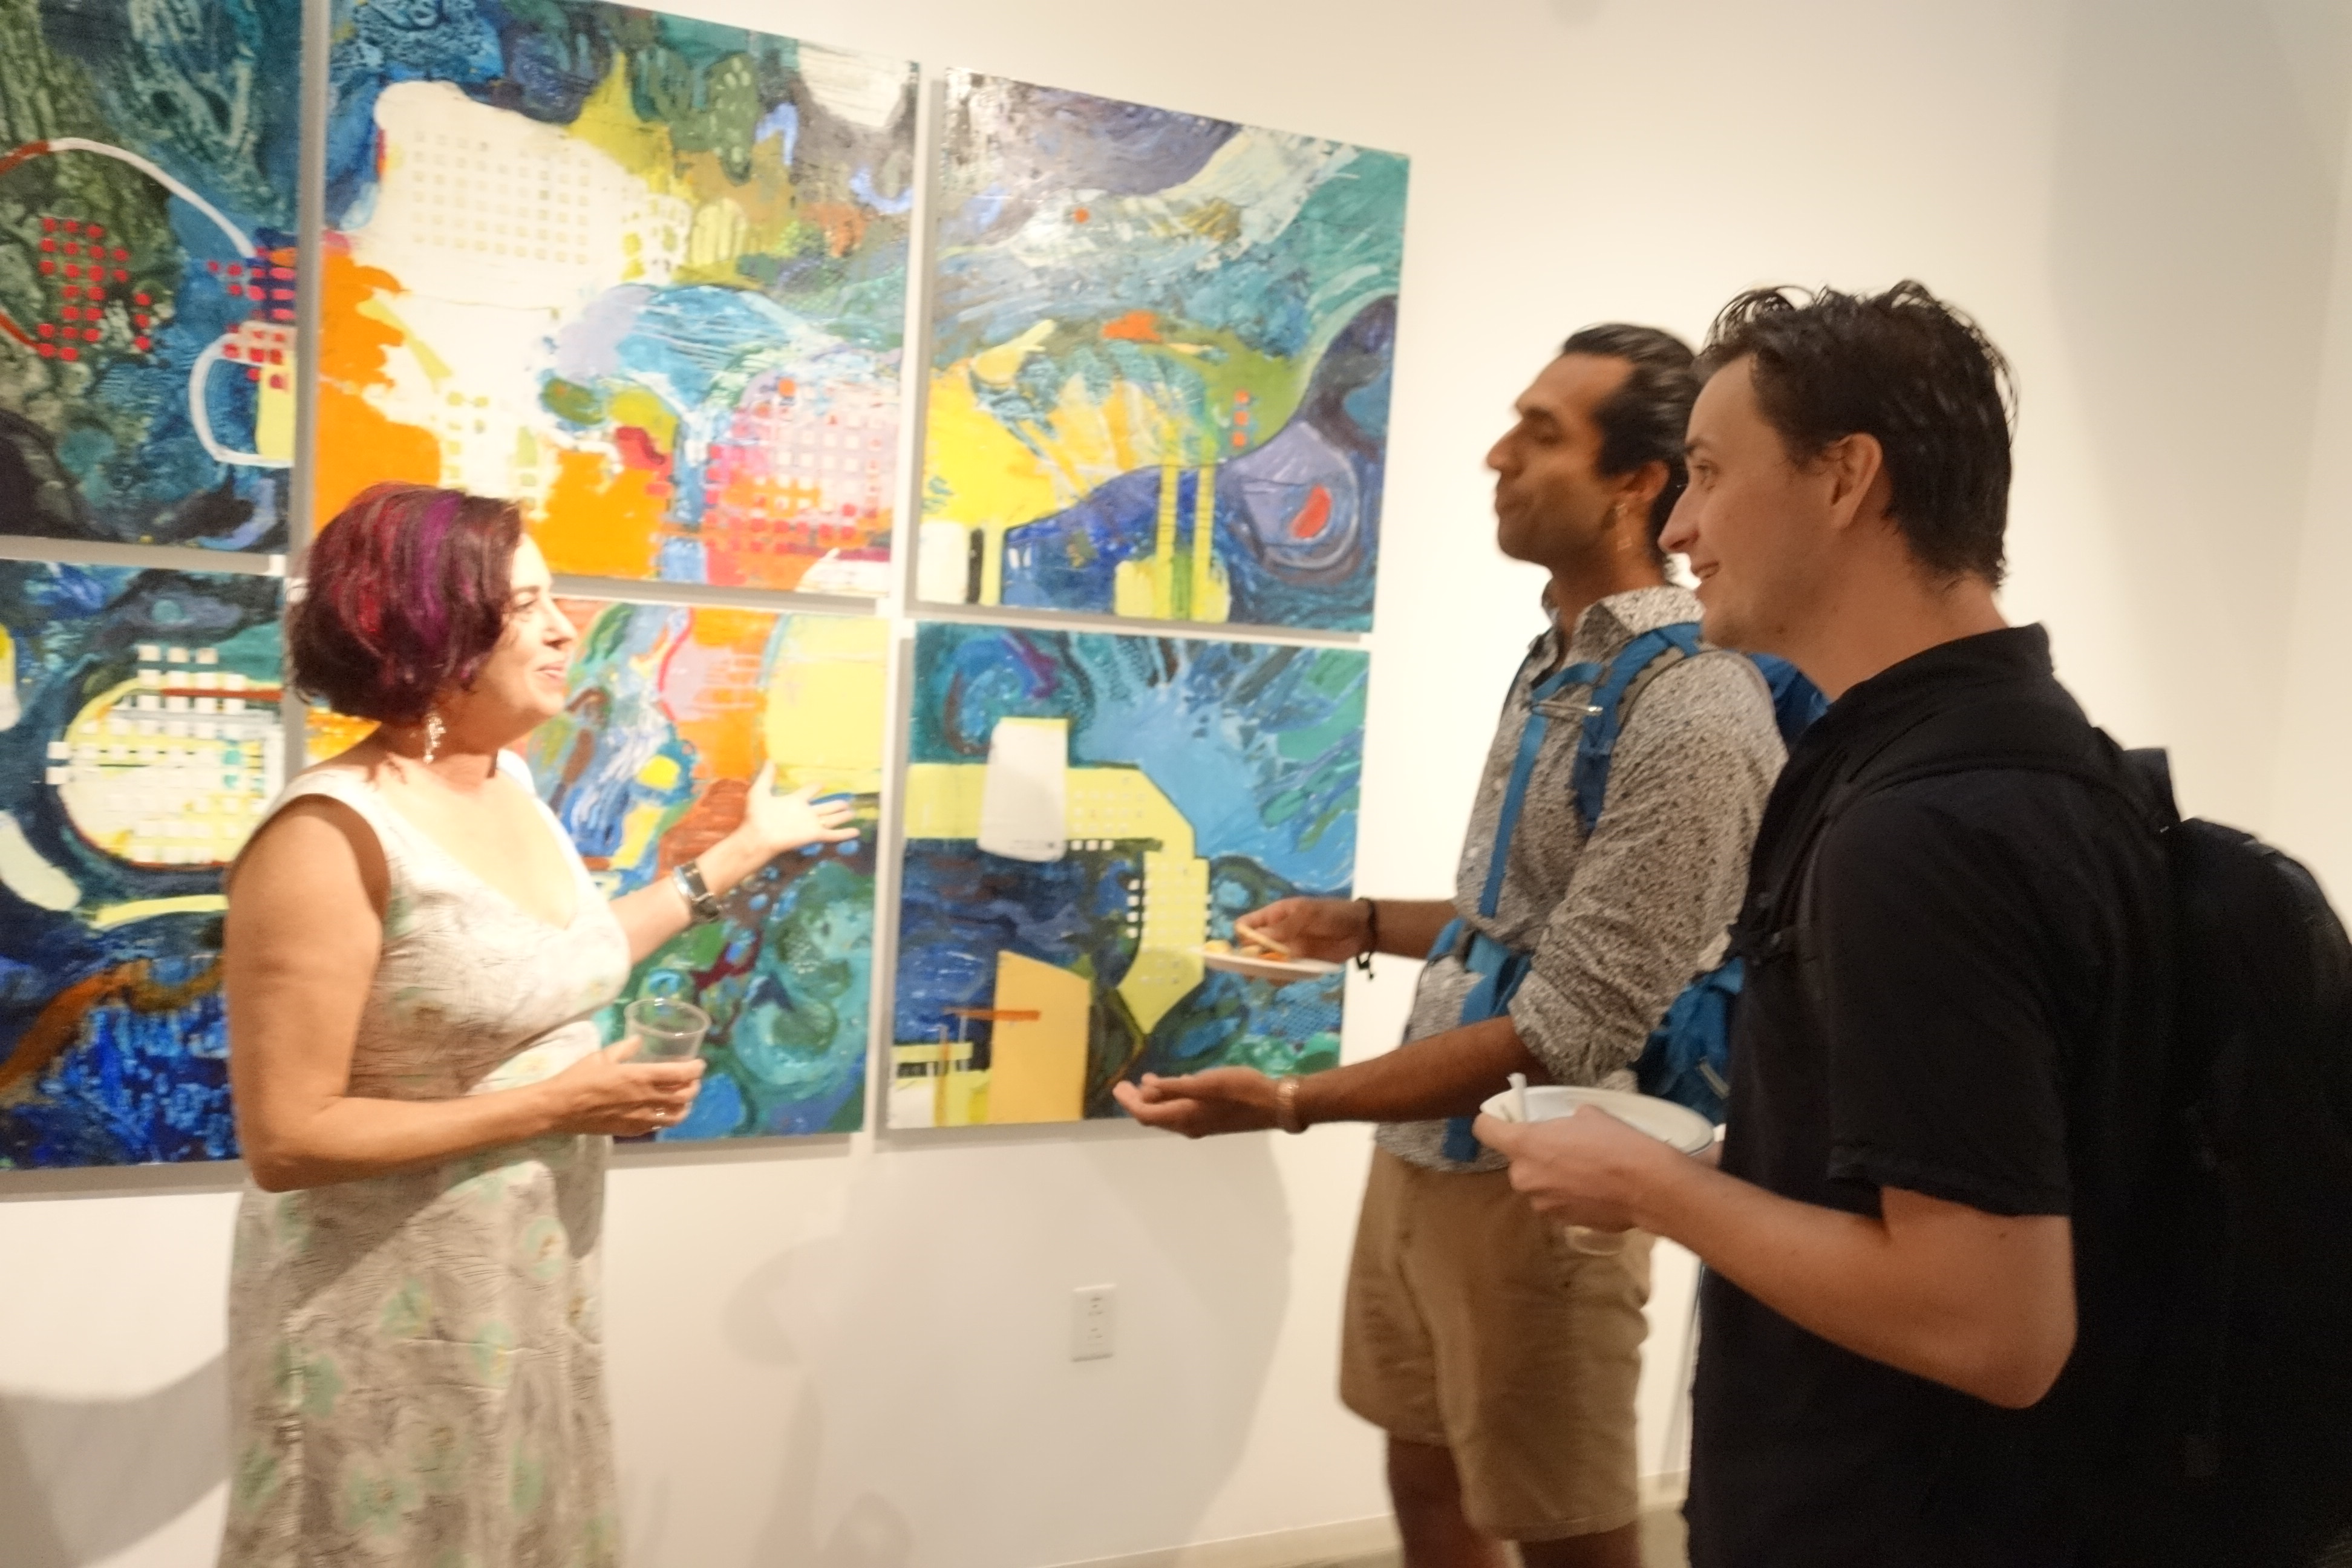 A group of people standing around in front of paintings.